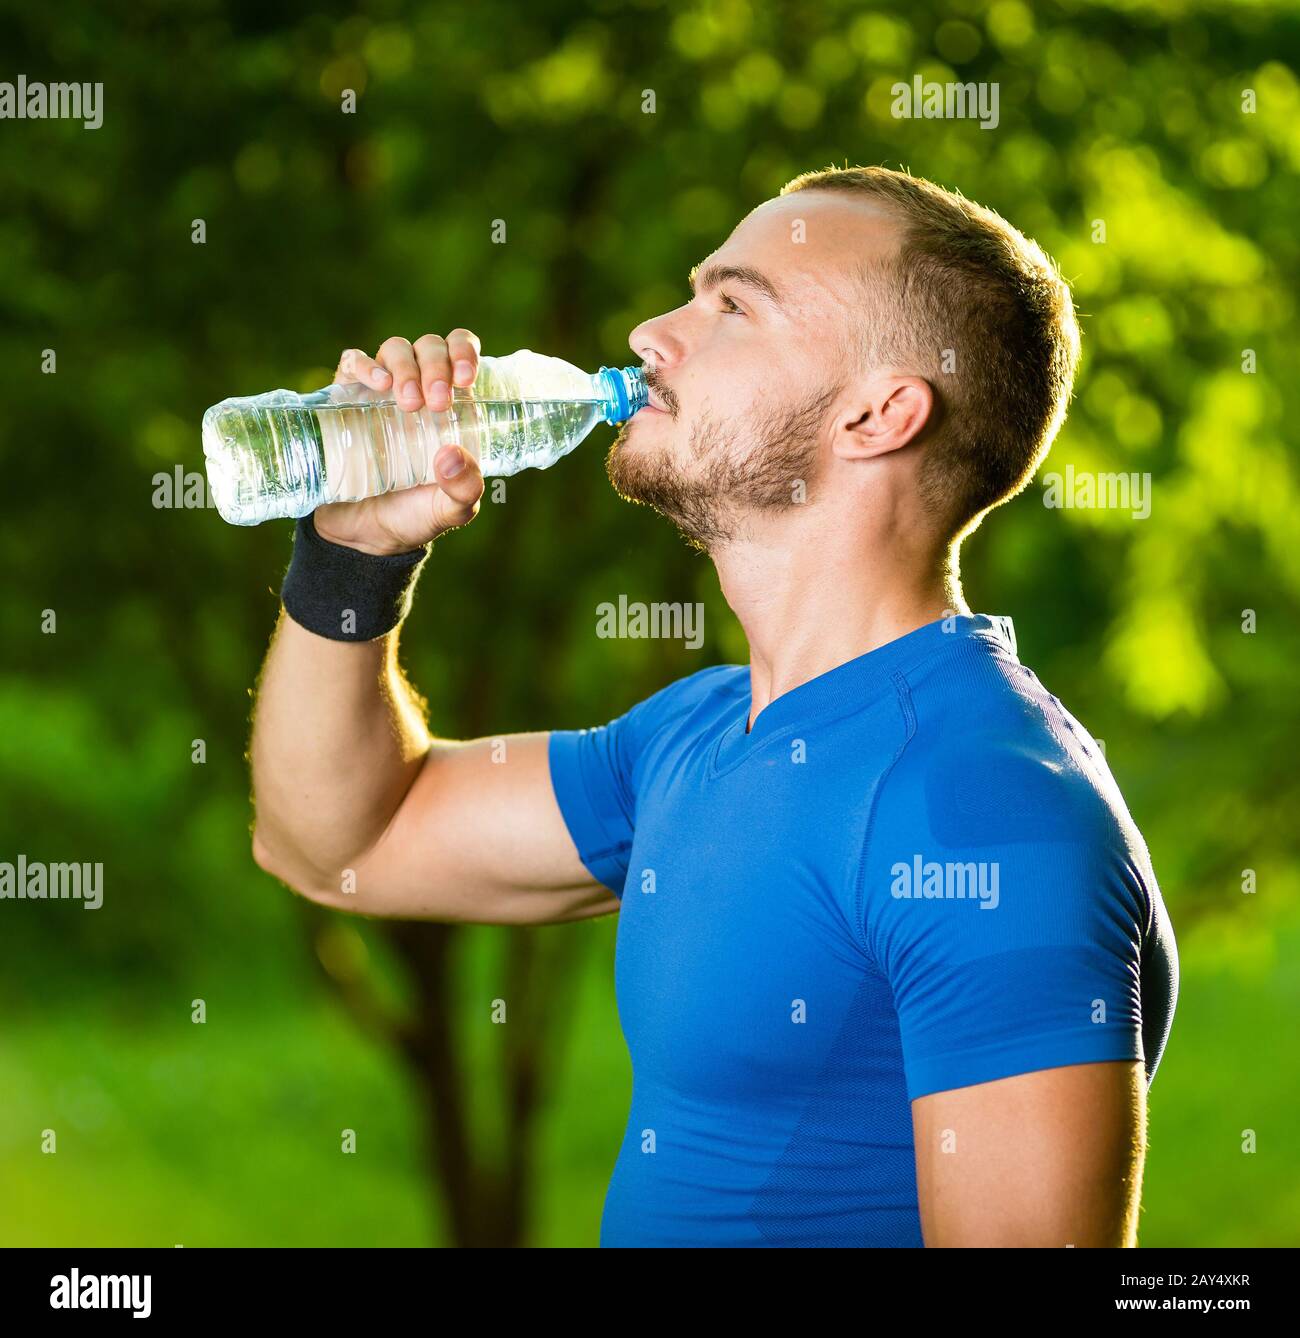 https://c8.alamy.com/comp/2AY4XKR/athletic-mature-man-drinking-water-from-a-bottle-2AY4XKR.jpg